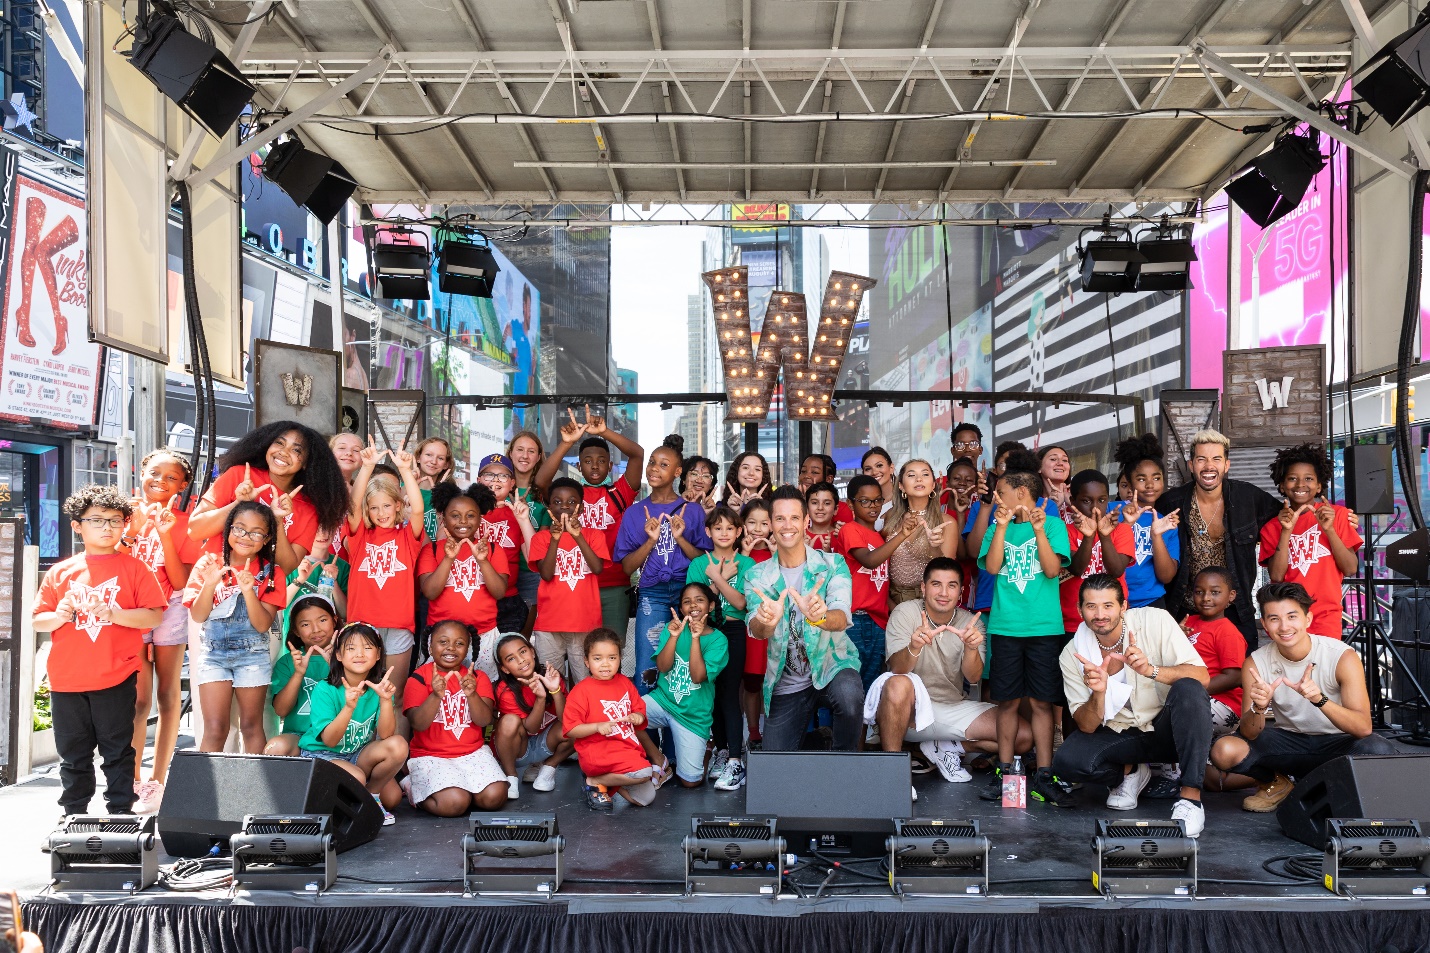 Iconic Kids Variety Show Wonderama Recorded Live In Times Square New York, Streams Online and On National Television With 2022-2023 Season Debut Saturday, 9/17/22